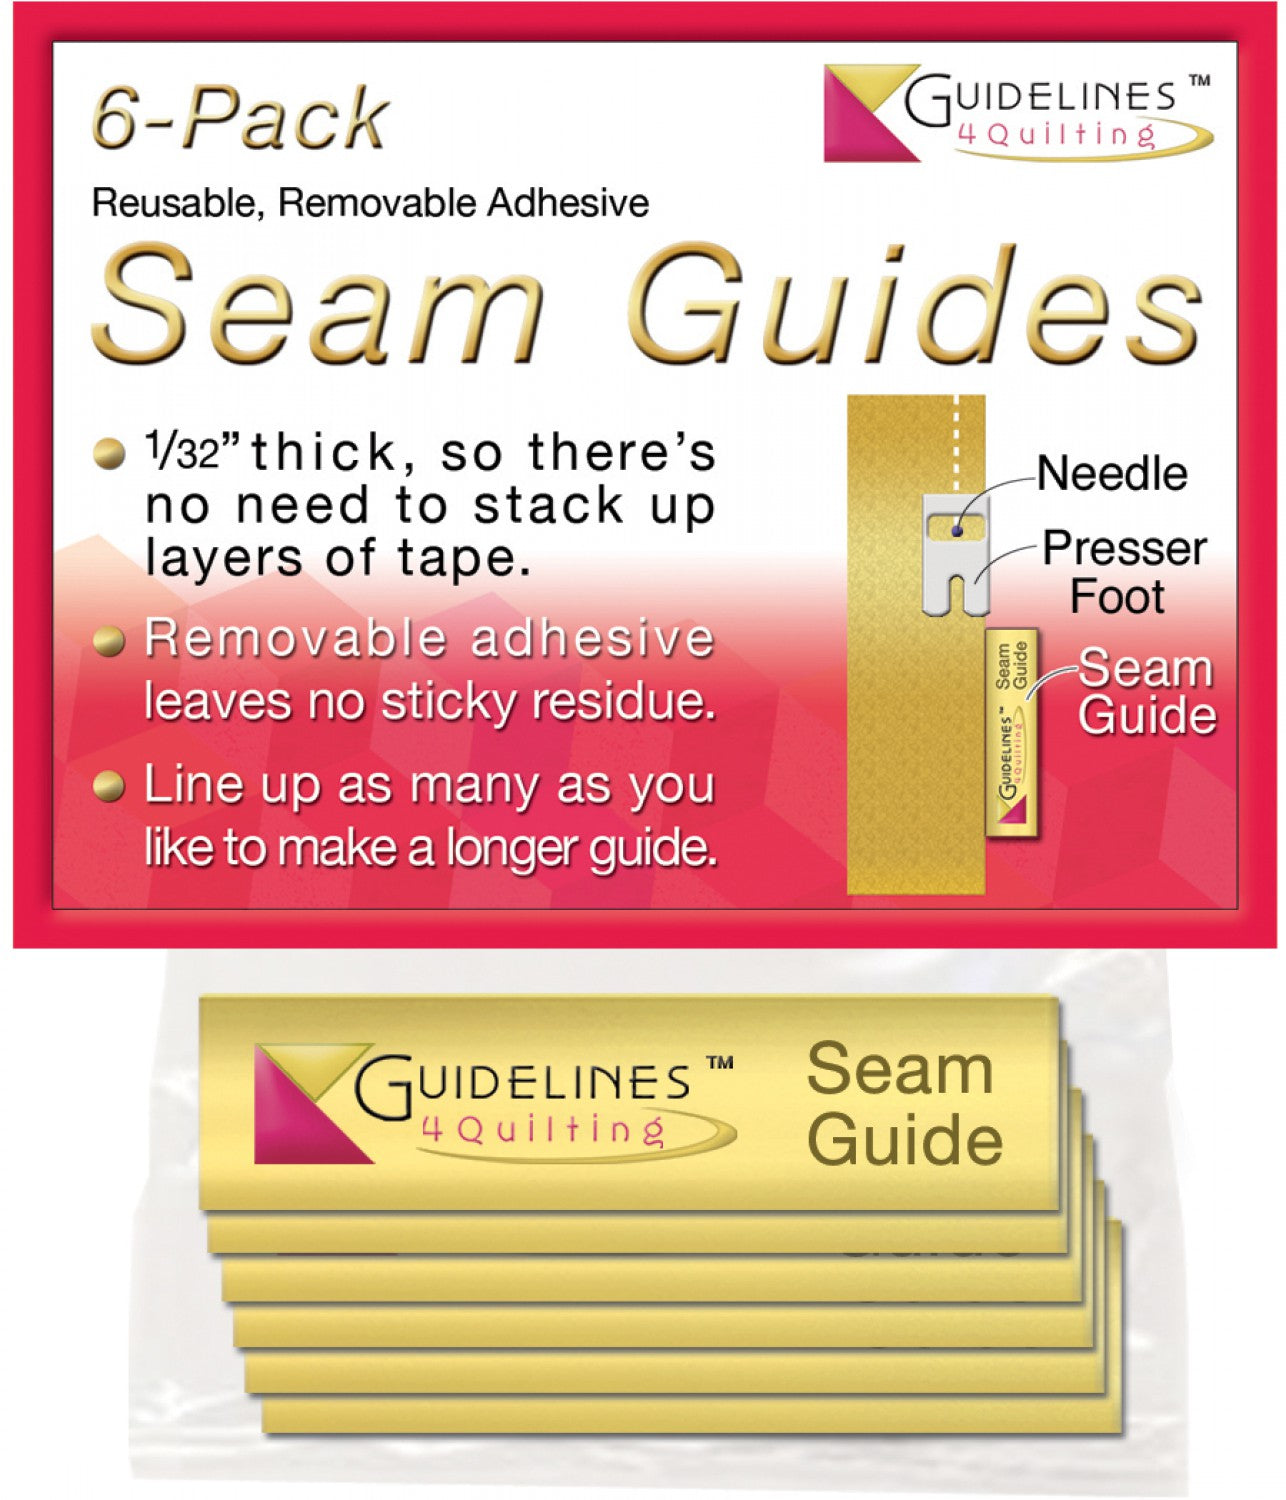 Guidelines4Quilting Seam Guide 6-Pack GL-PTSG